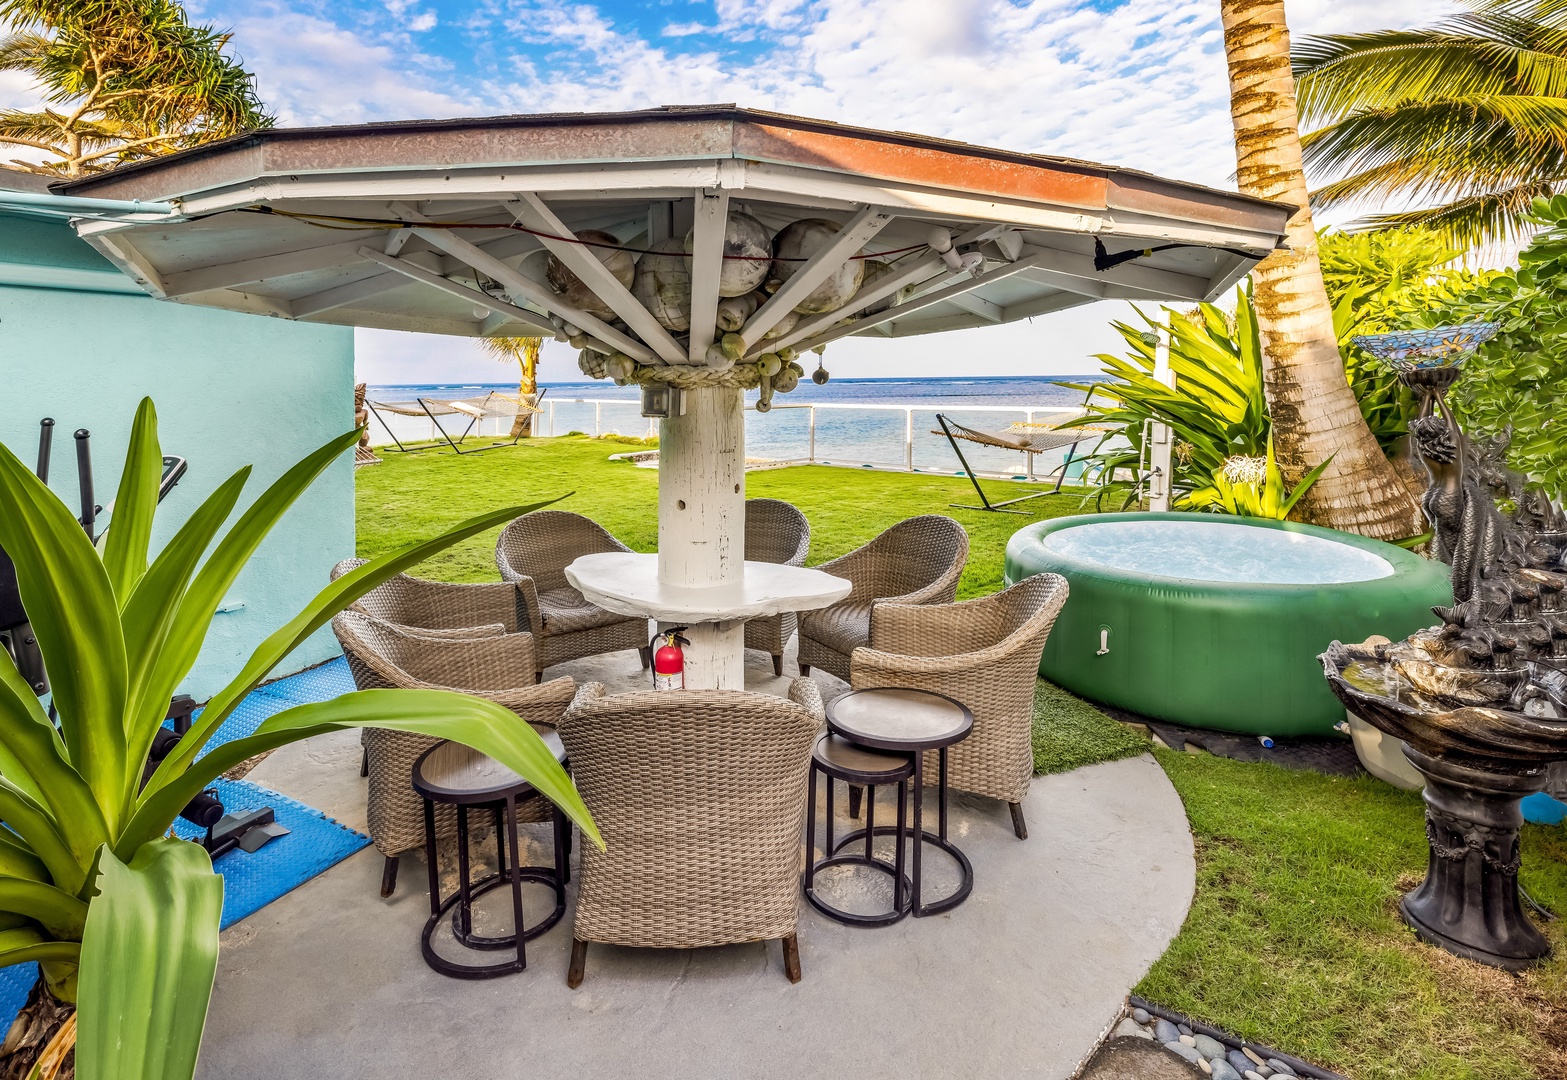 Hauula Vacation Rentals, Paradise Reef Retreat - Outdoor patio right beside the jacuzzi